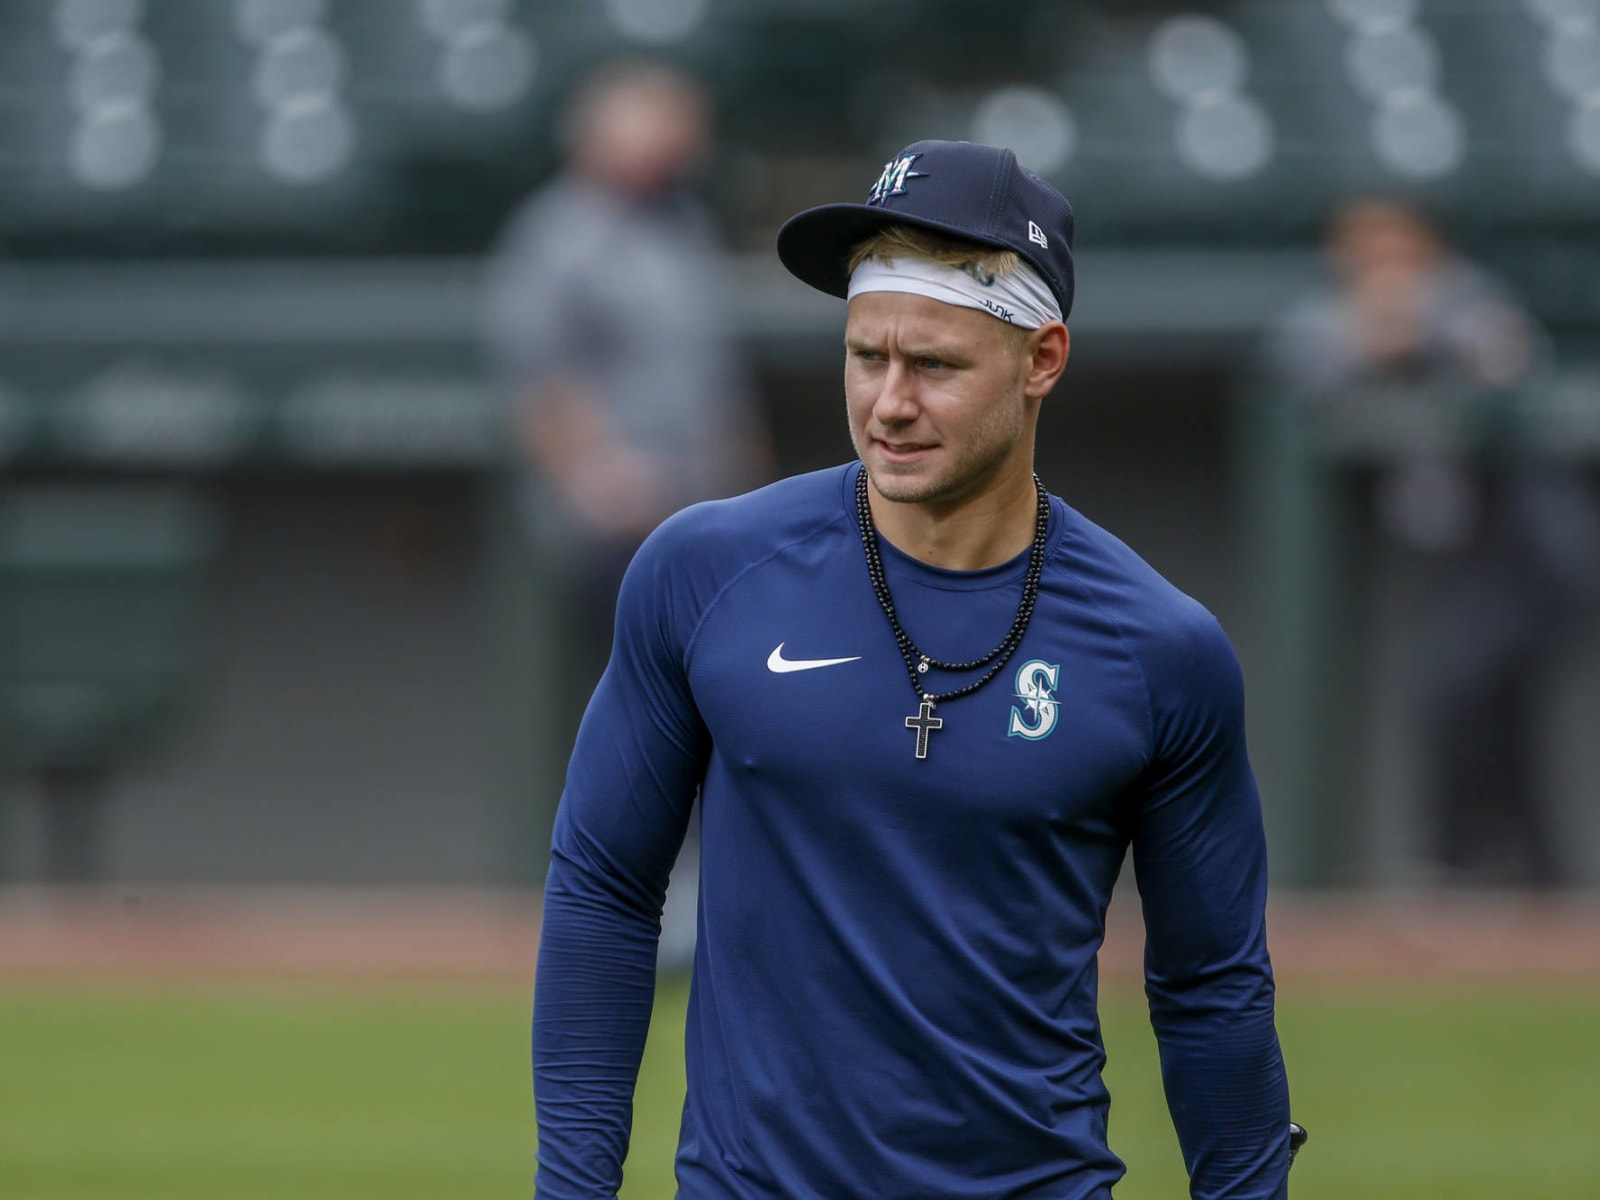 Is Kyle Seager overpaid?